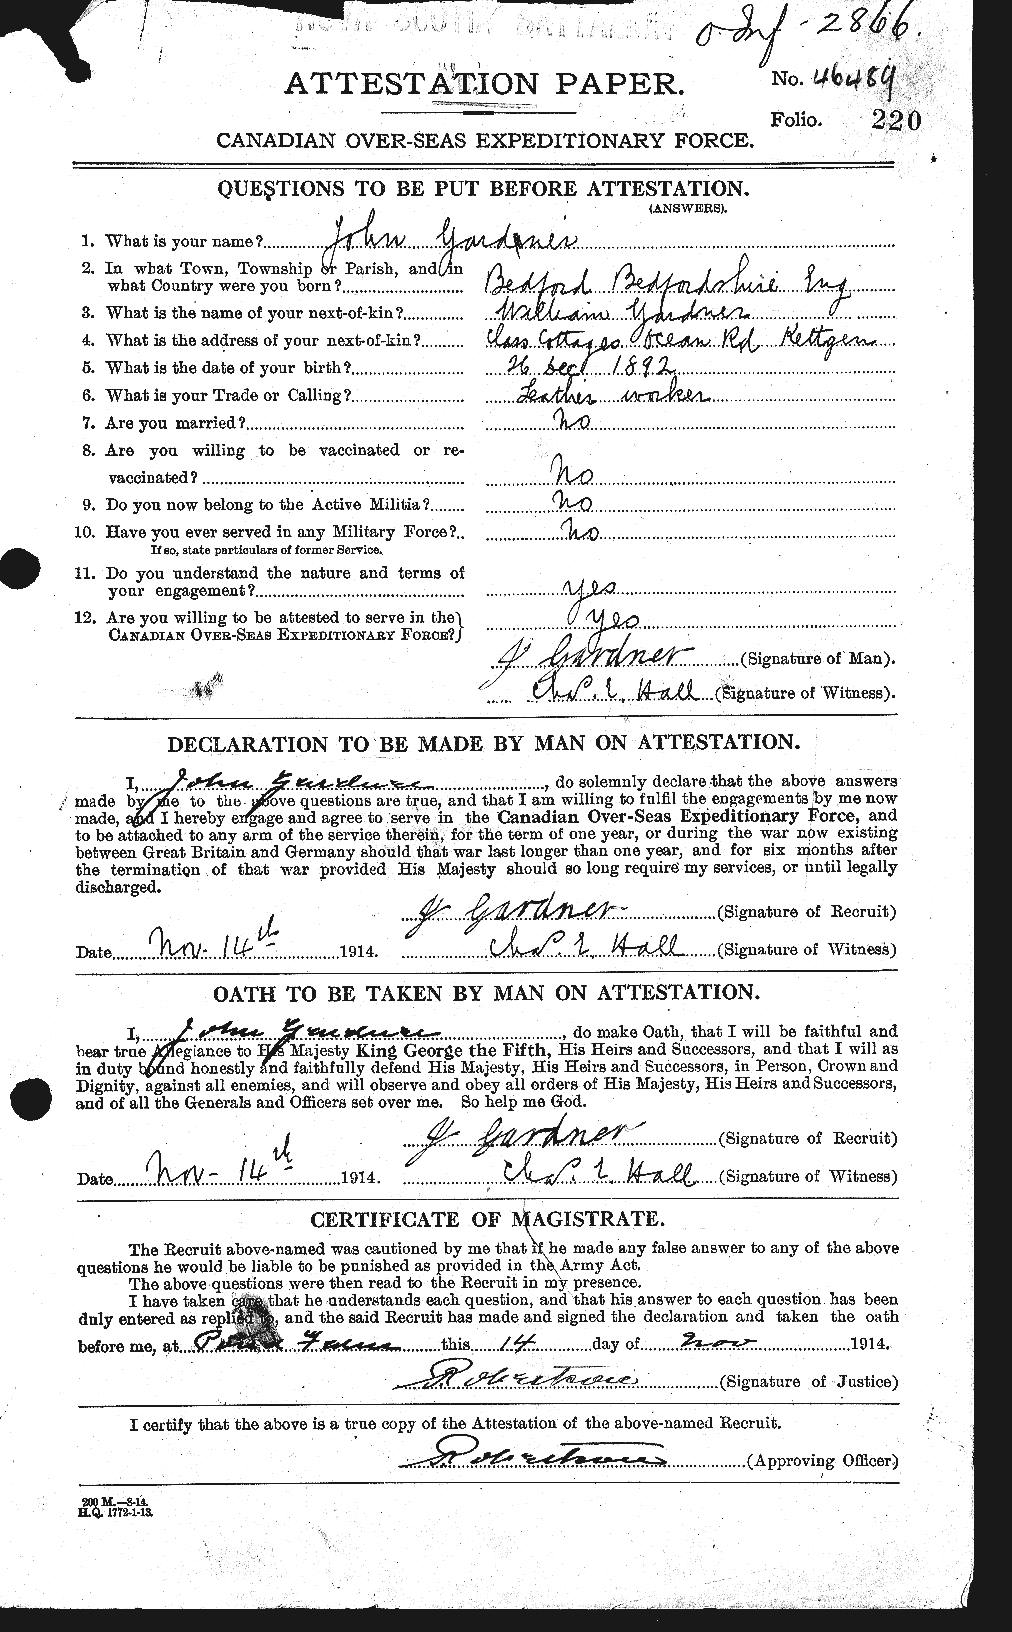 Personnel Records of the First World War - CEF 342447a